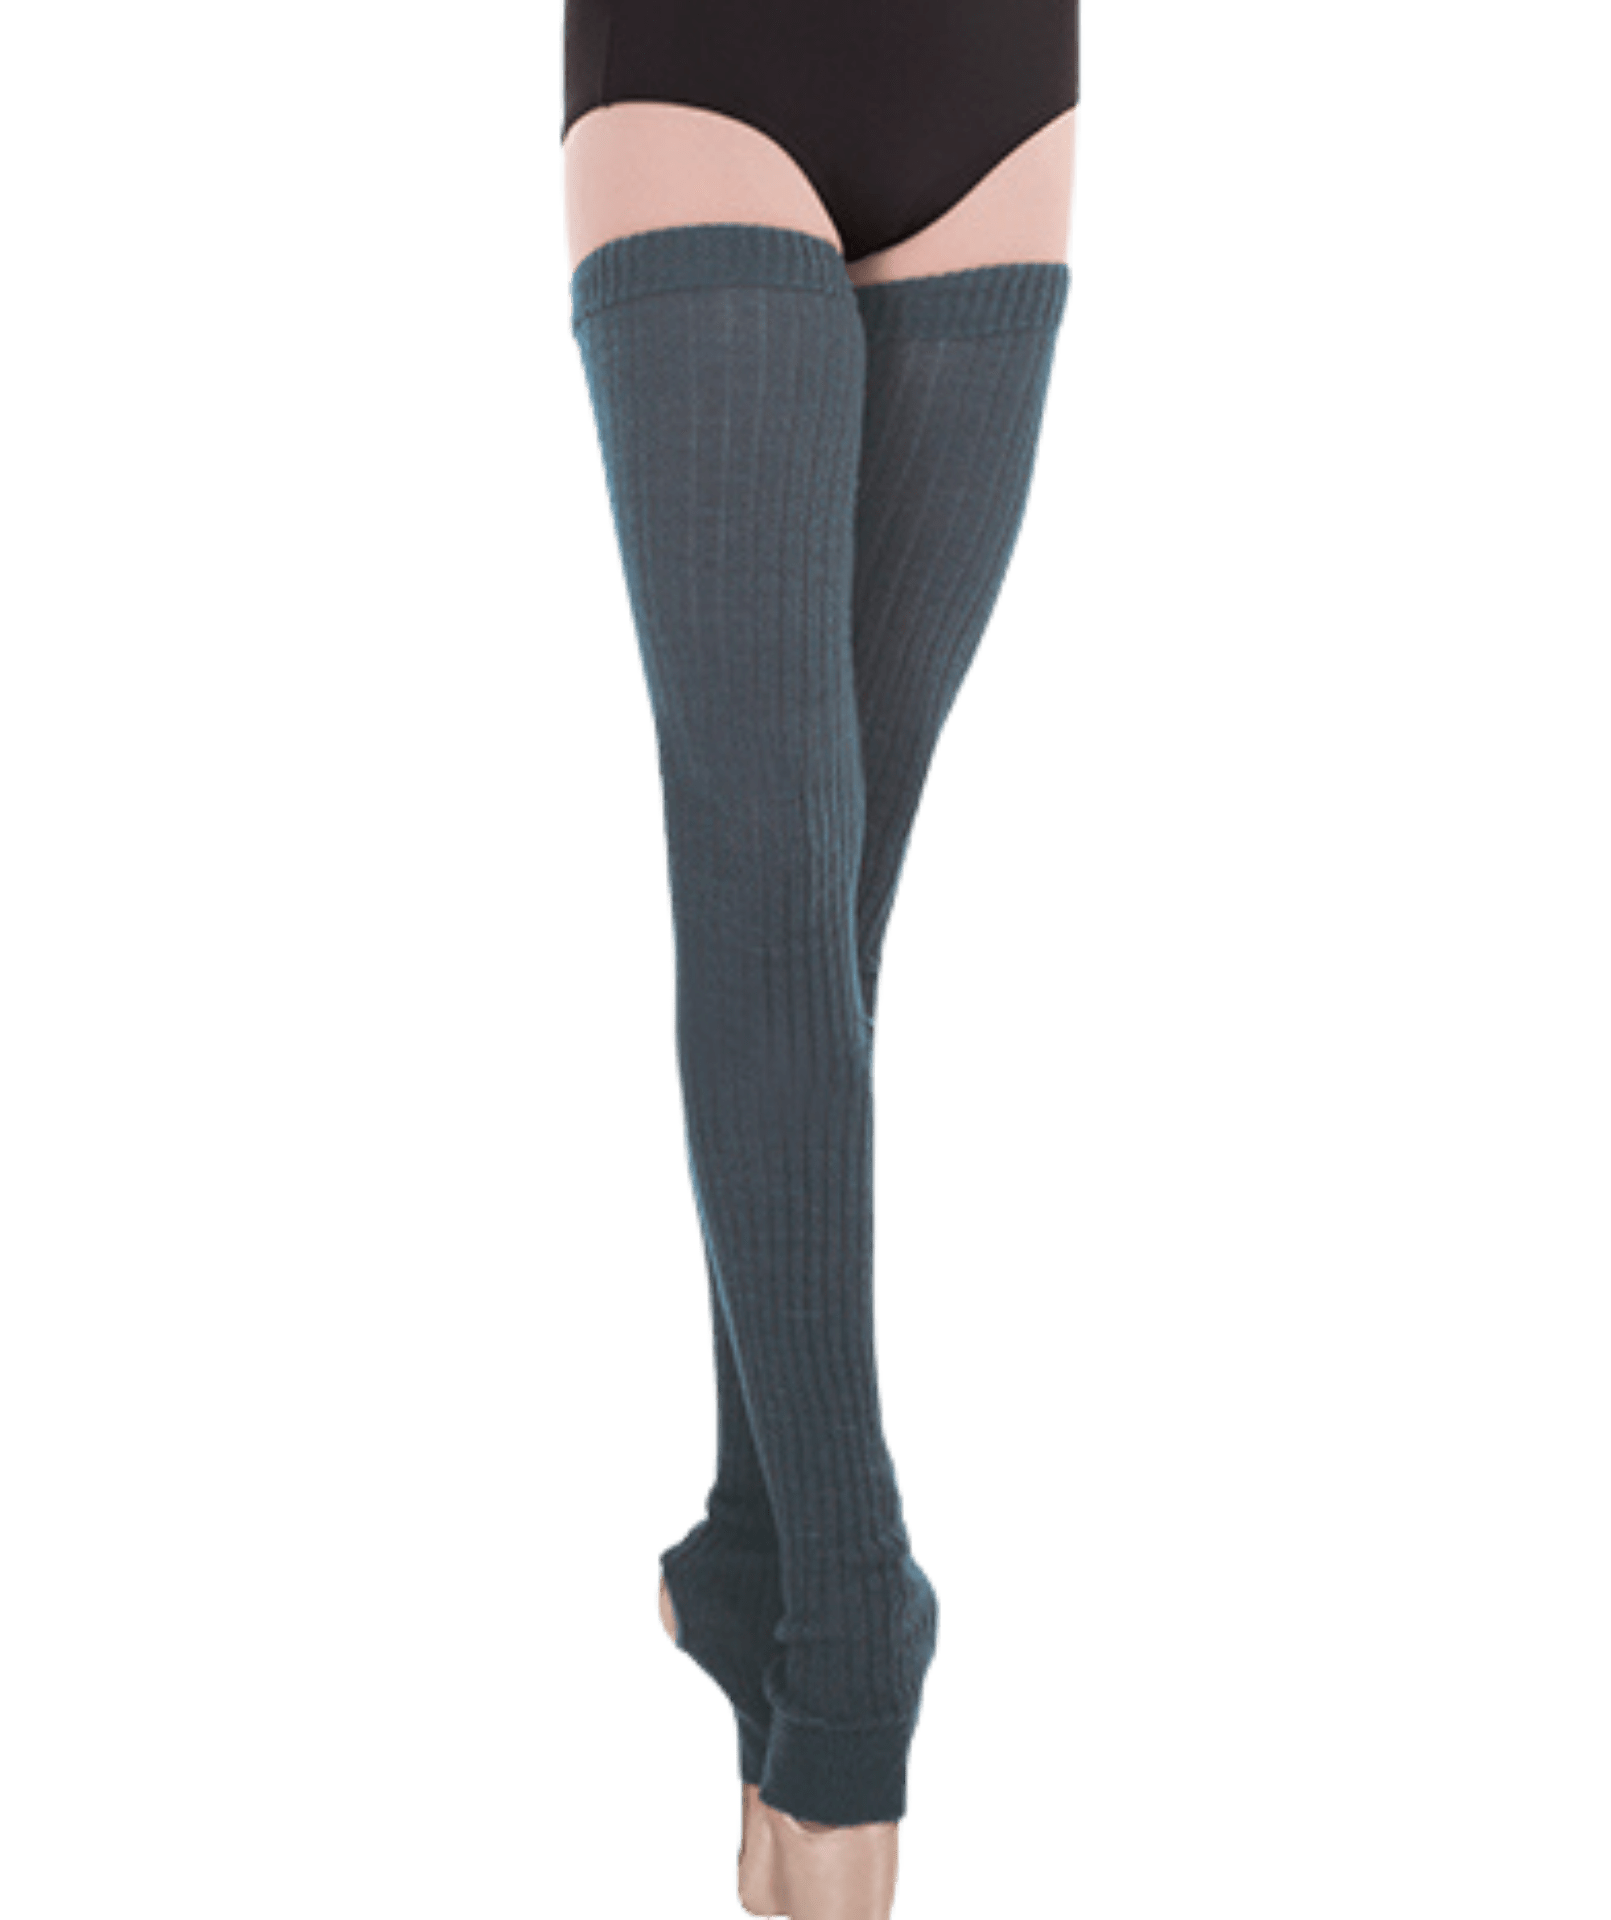 Body Wrappers Women&#39;s Stirrup Leg Warmers 48 inches